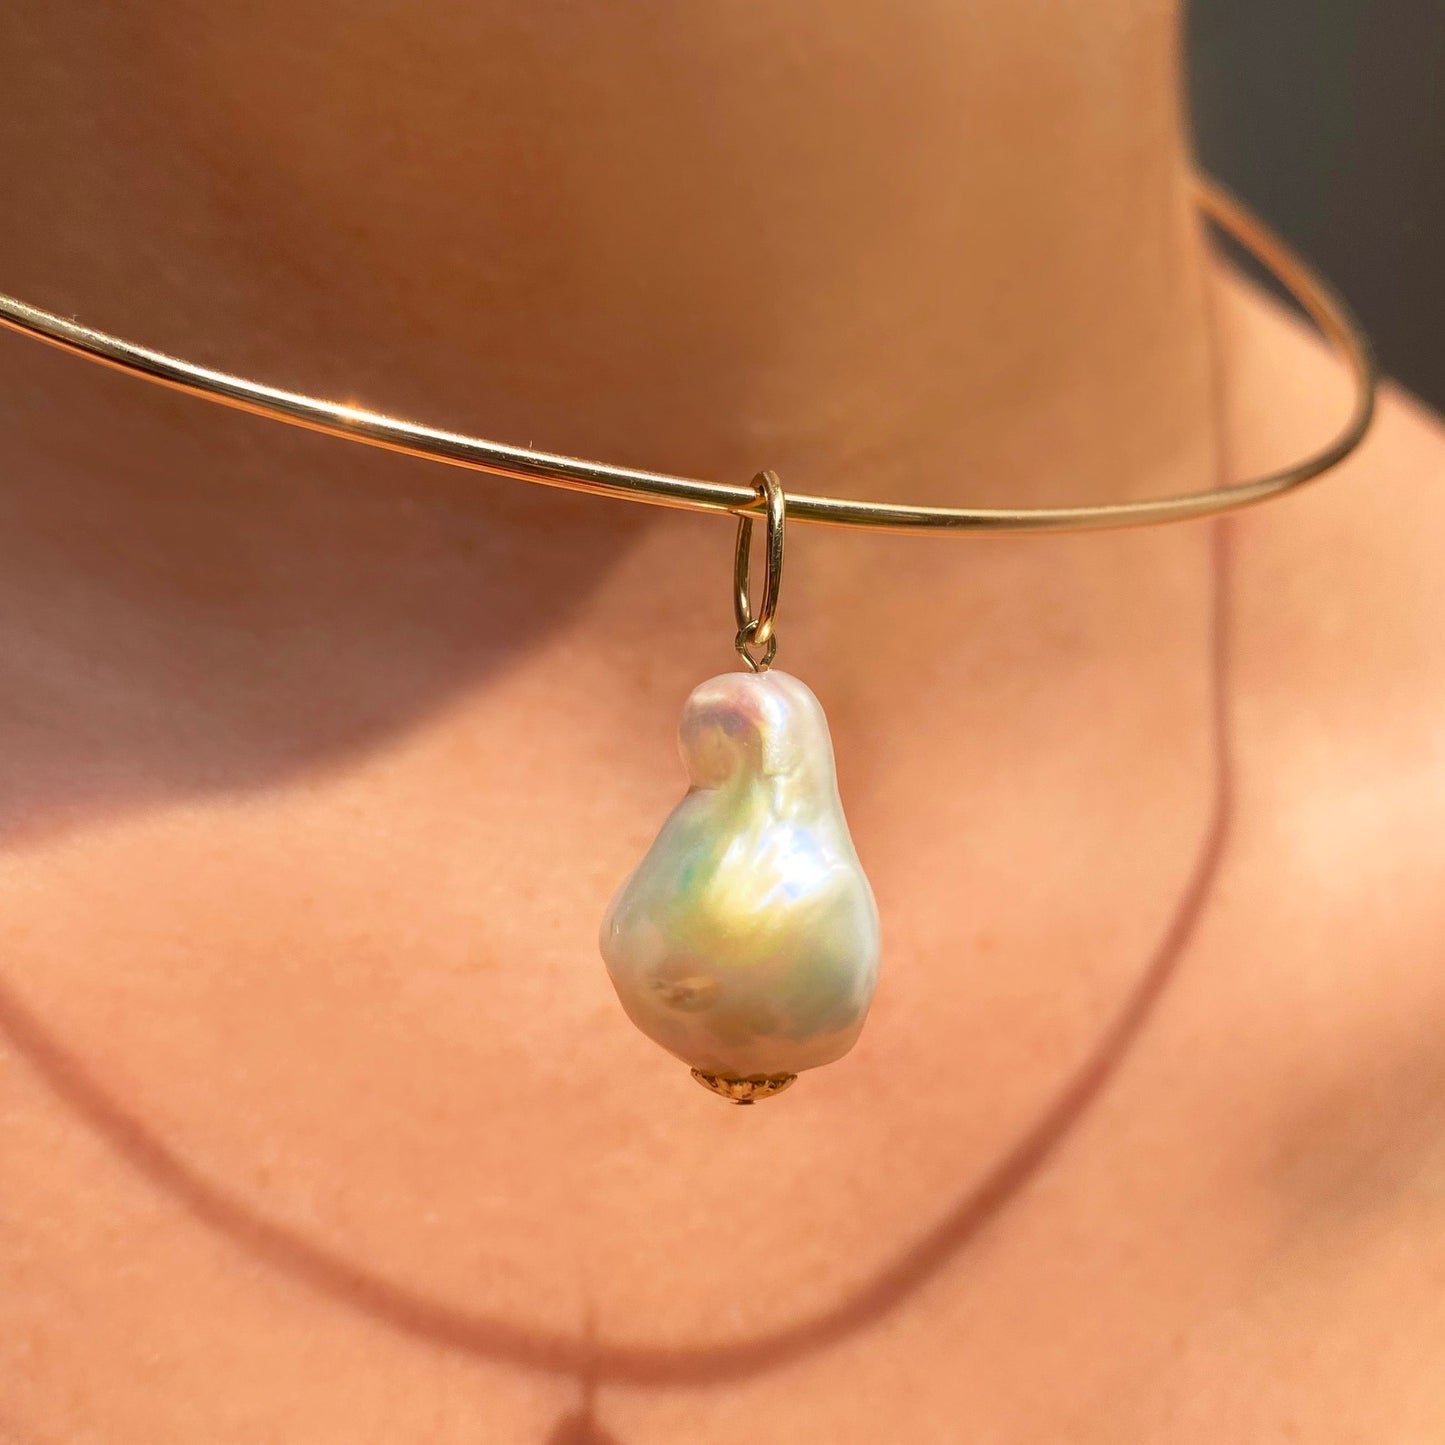 Baroque Pearl Charm. Styled on a neck hanging from a wire choker necklace